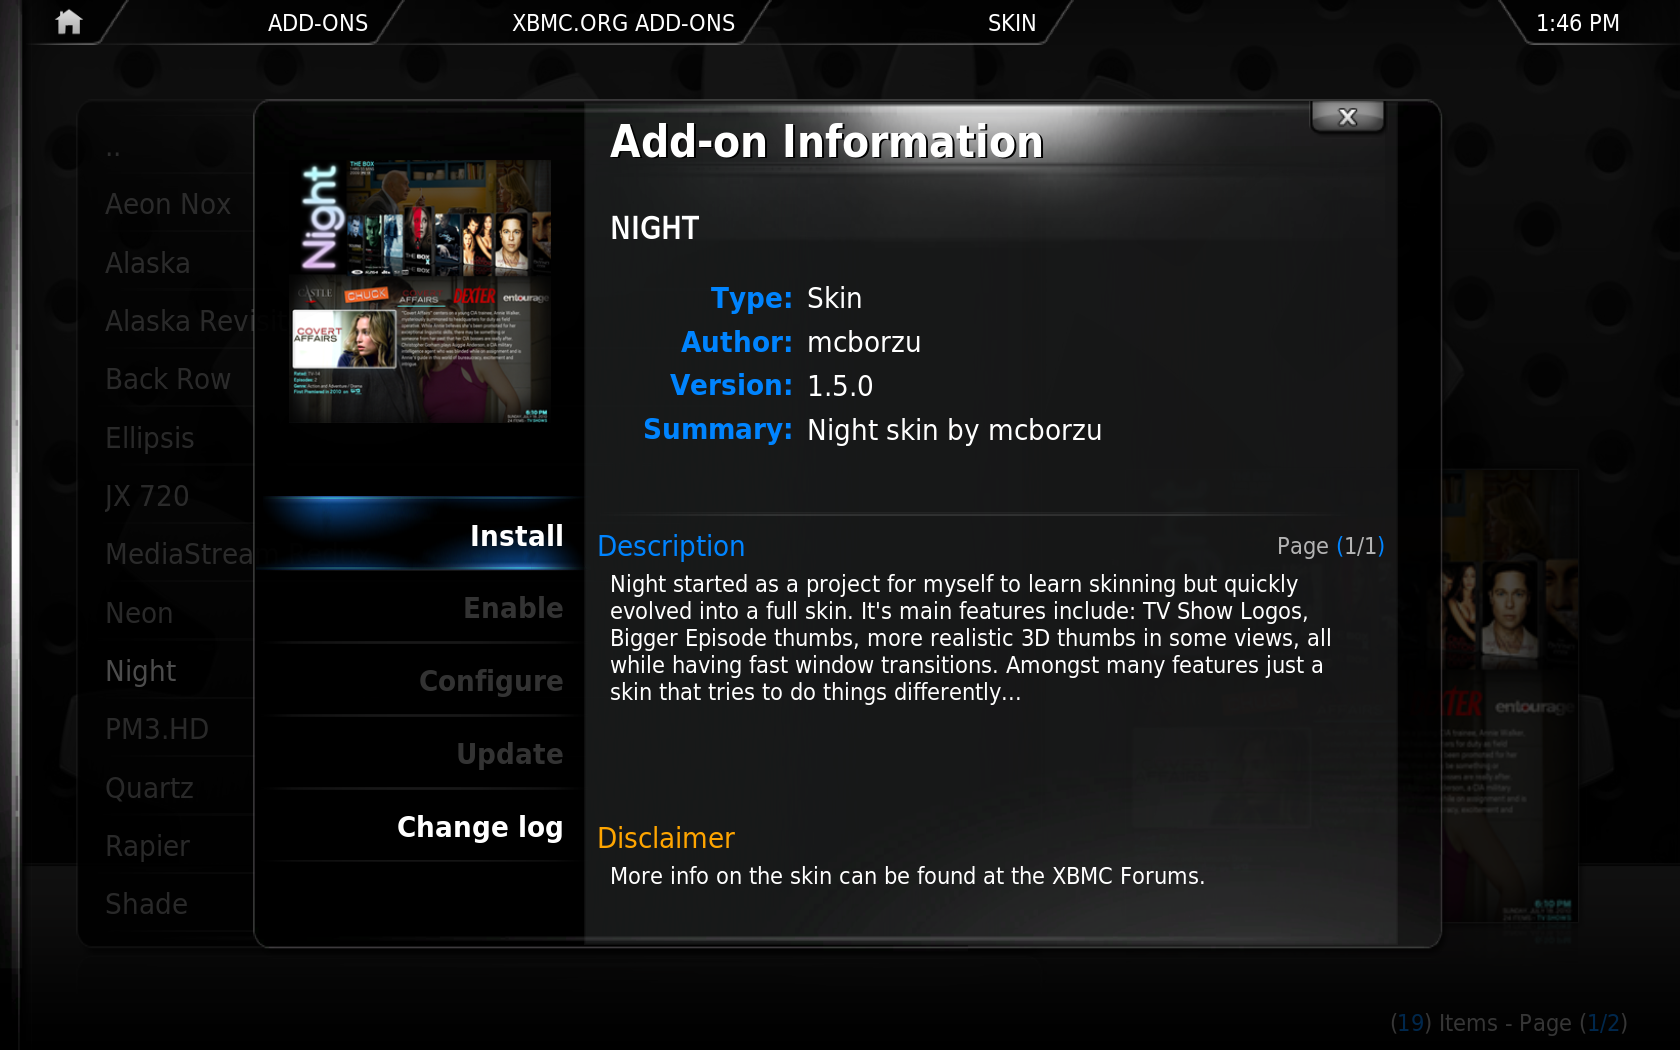 Step 4: Click the skin you want to install (in this example it is "Night")